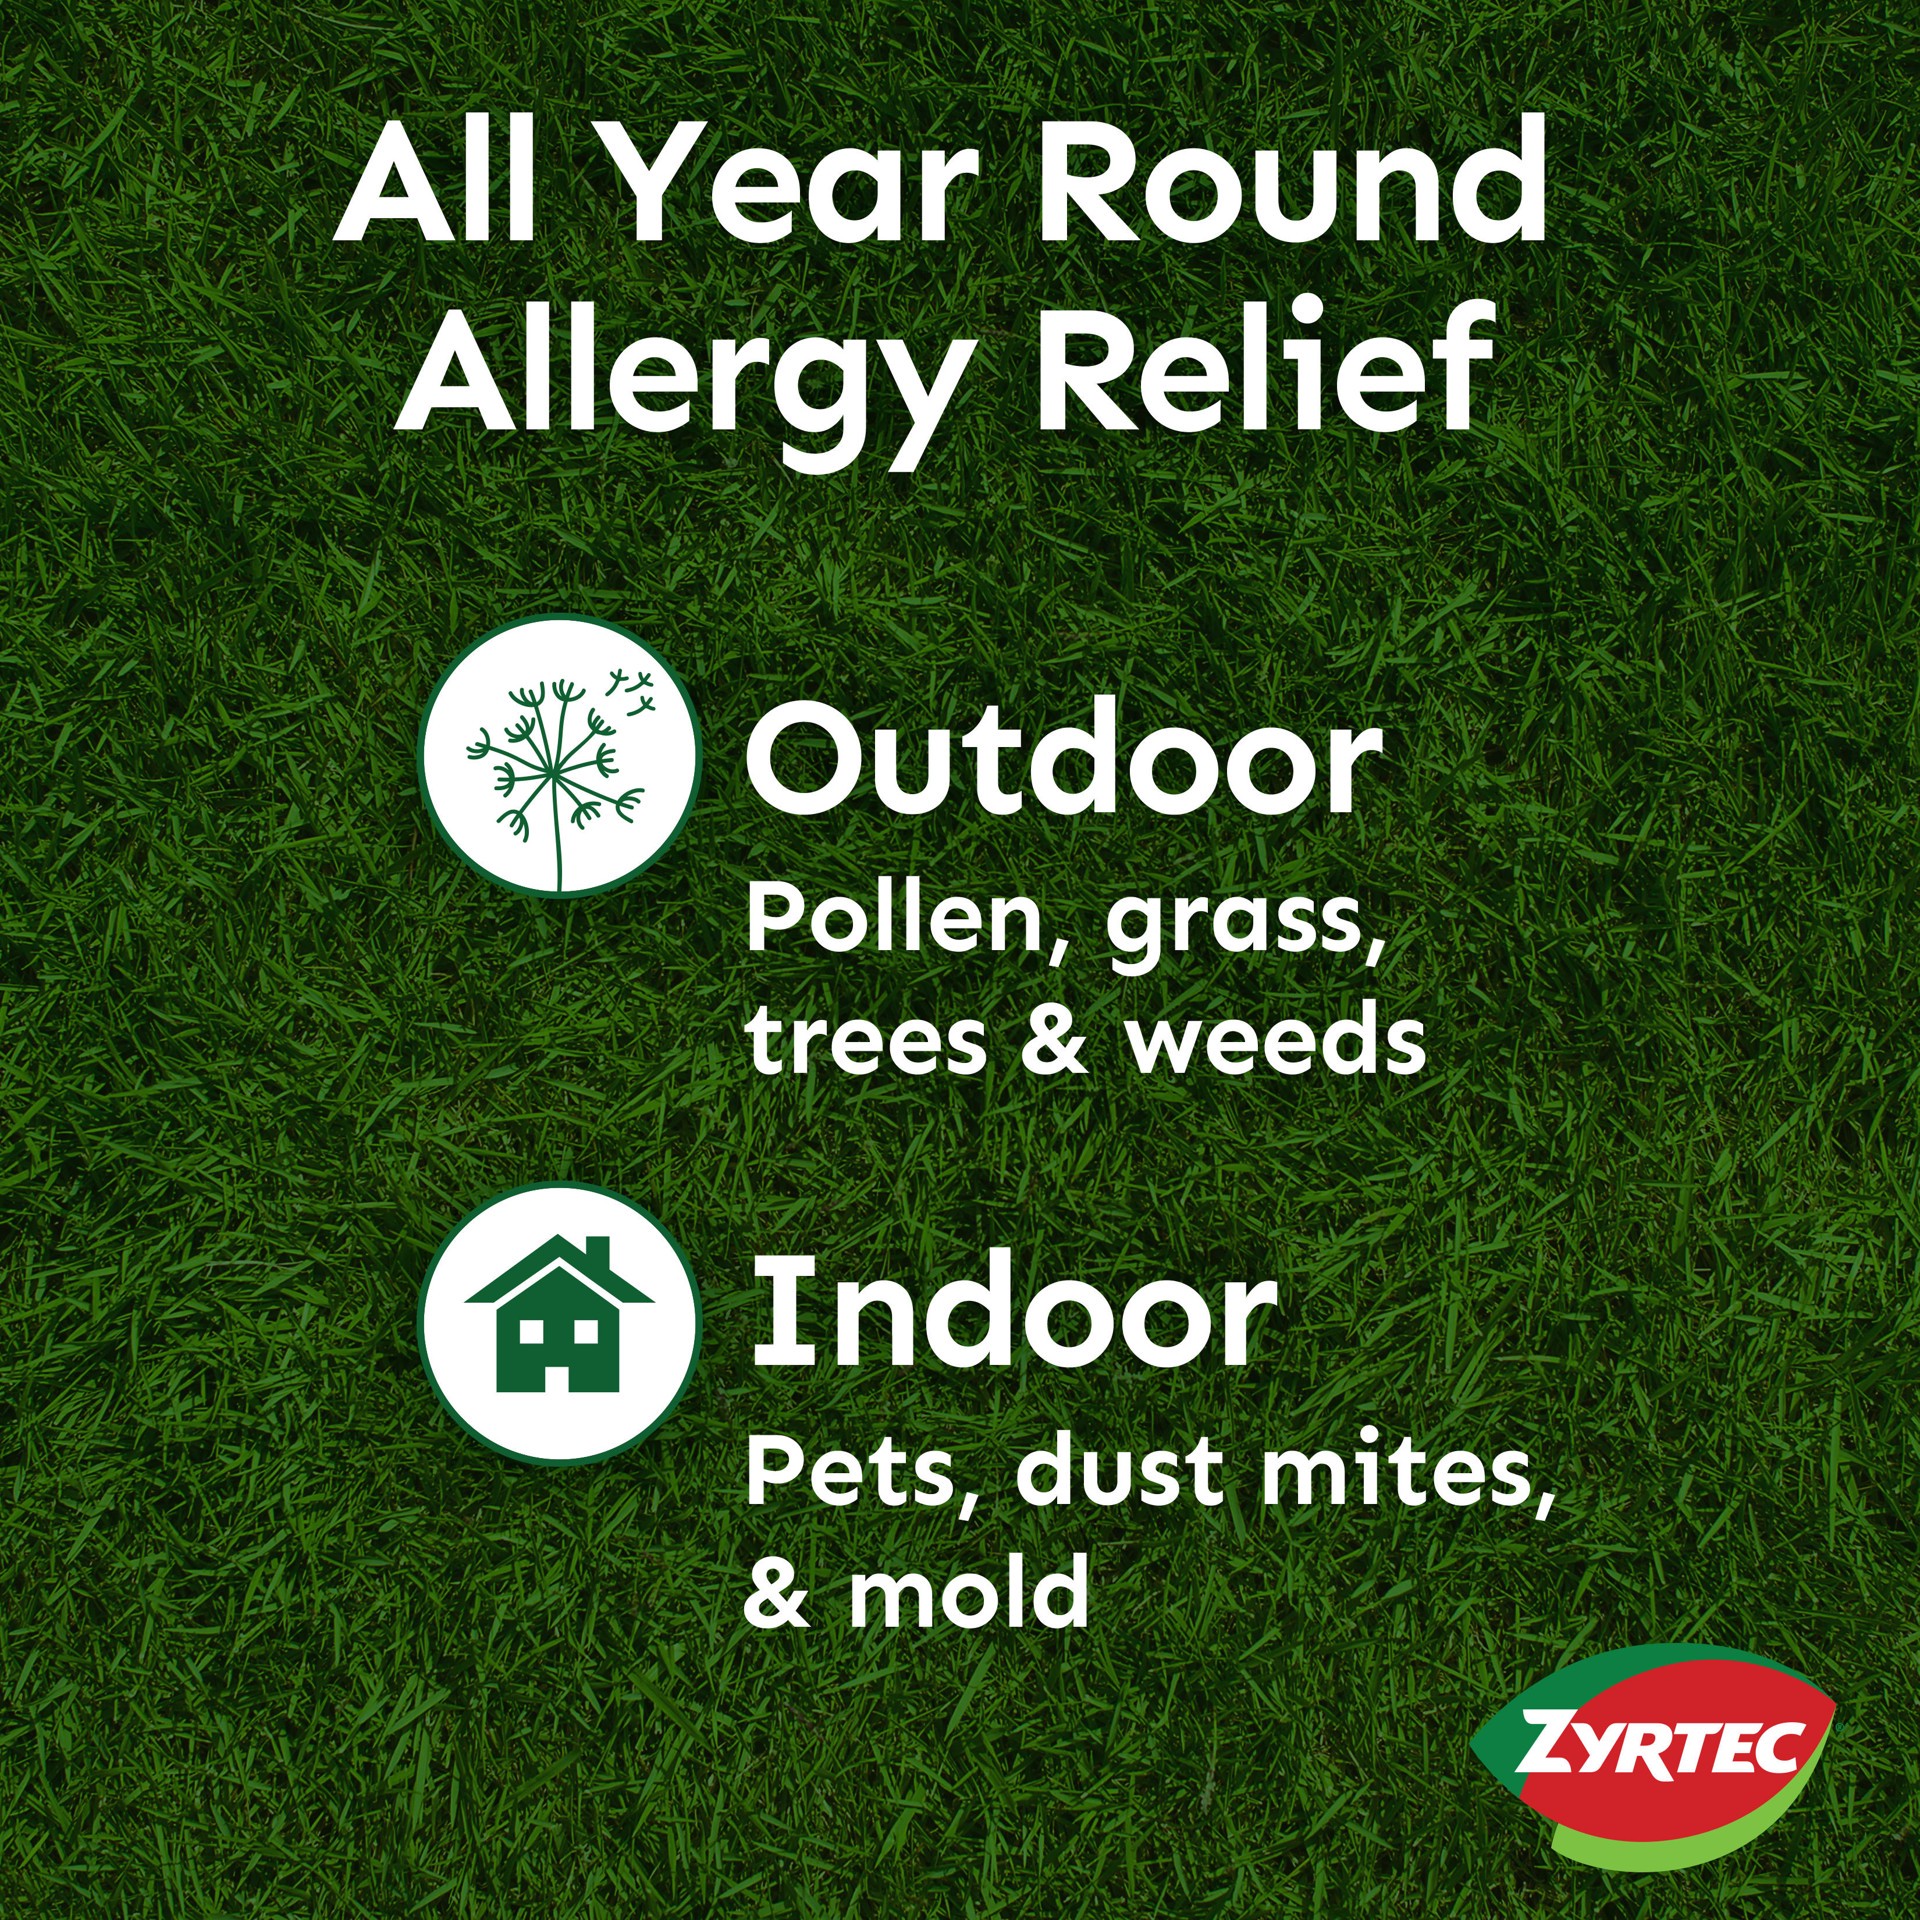 slide 7 of 10, Zyrtec 24 Hour Allergy Relief Tablets, Indoor & Outdoor Allergy Medicine with 10 mg Cetirizine HCl per Antihistamine Tablet, Relief of Allergies Caused by Ragweed & Tree Pollen, 90 ct, 90 ct